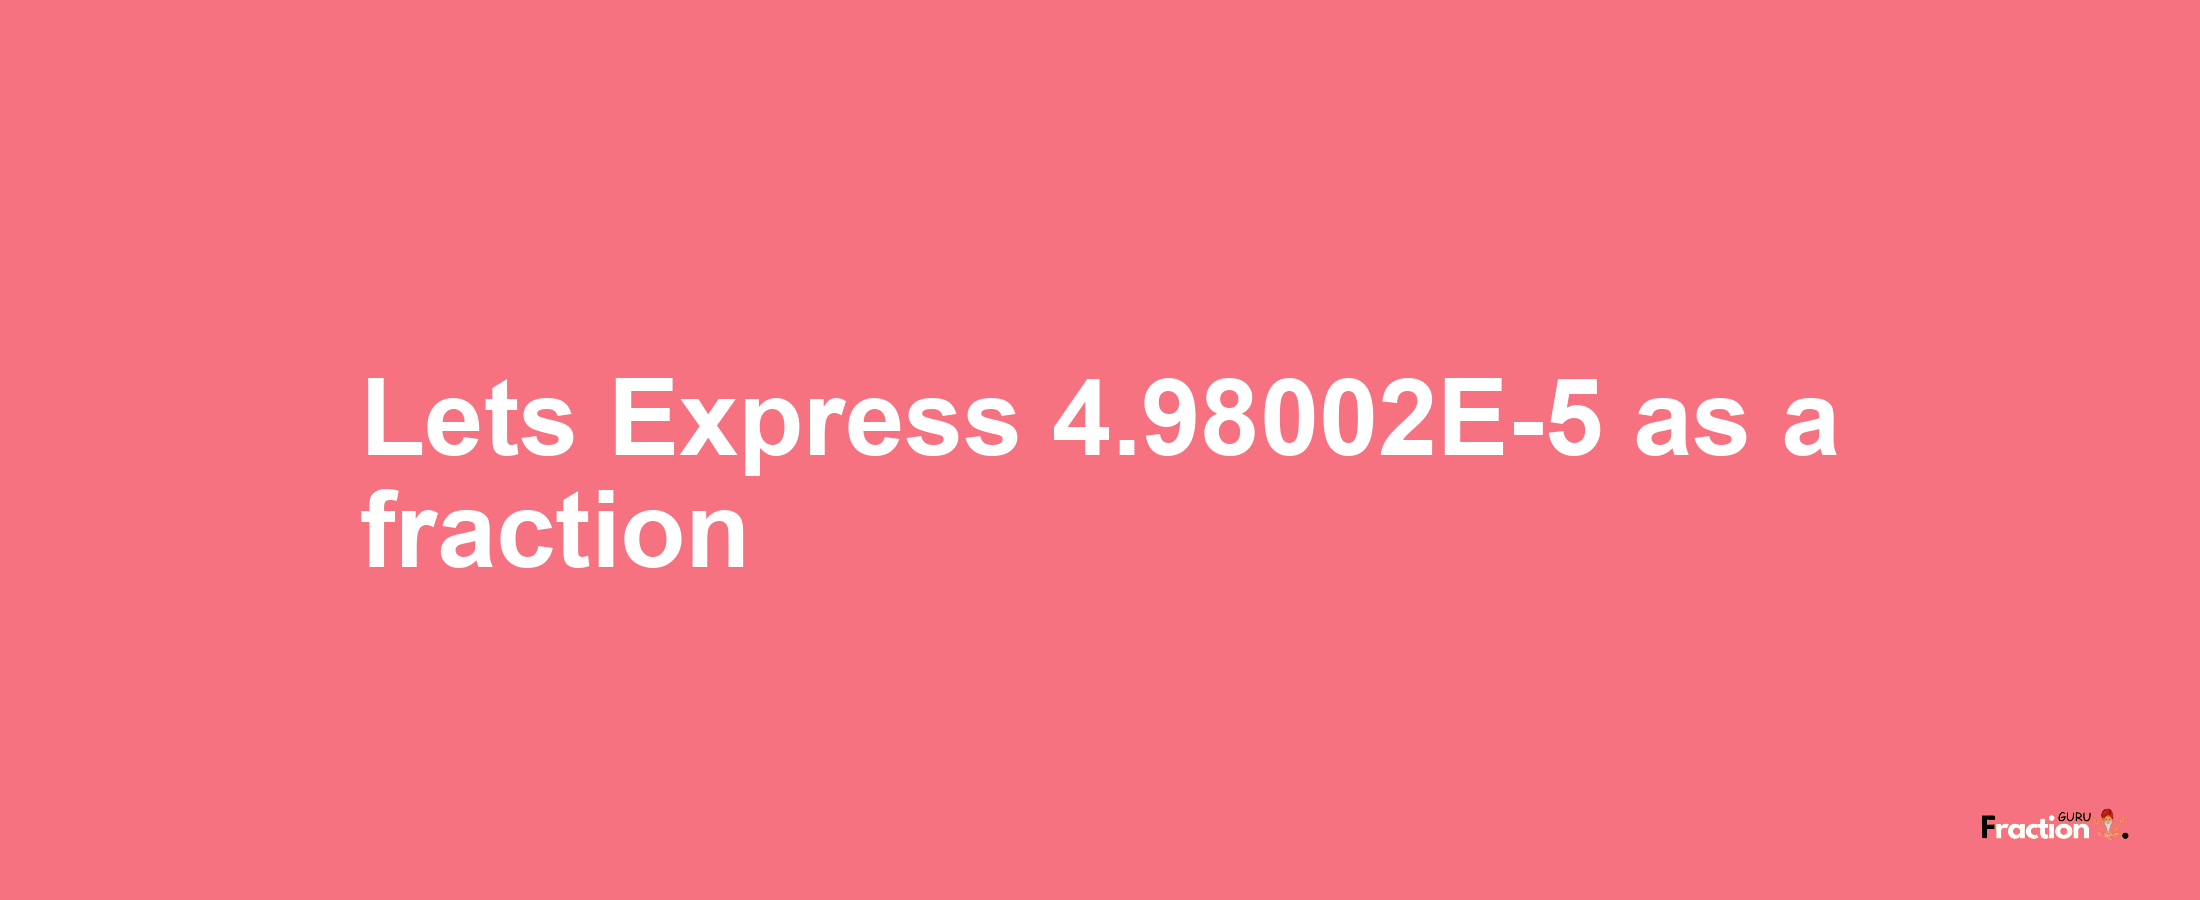 Lets Express 4.98002E-5 as afraction